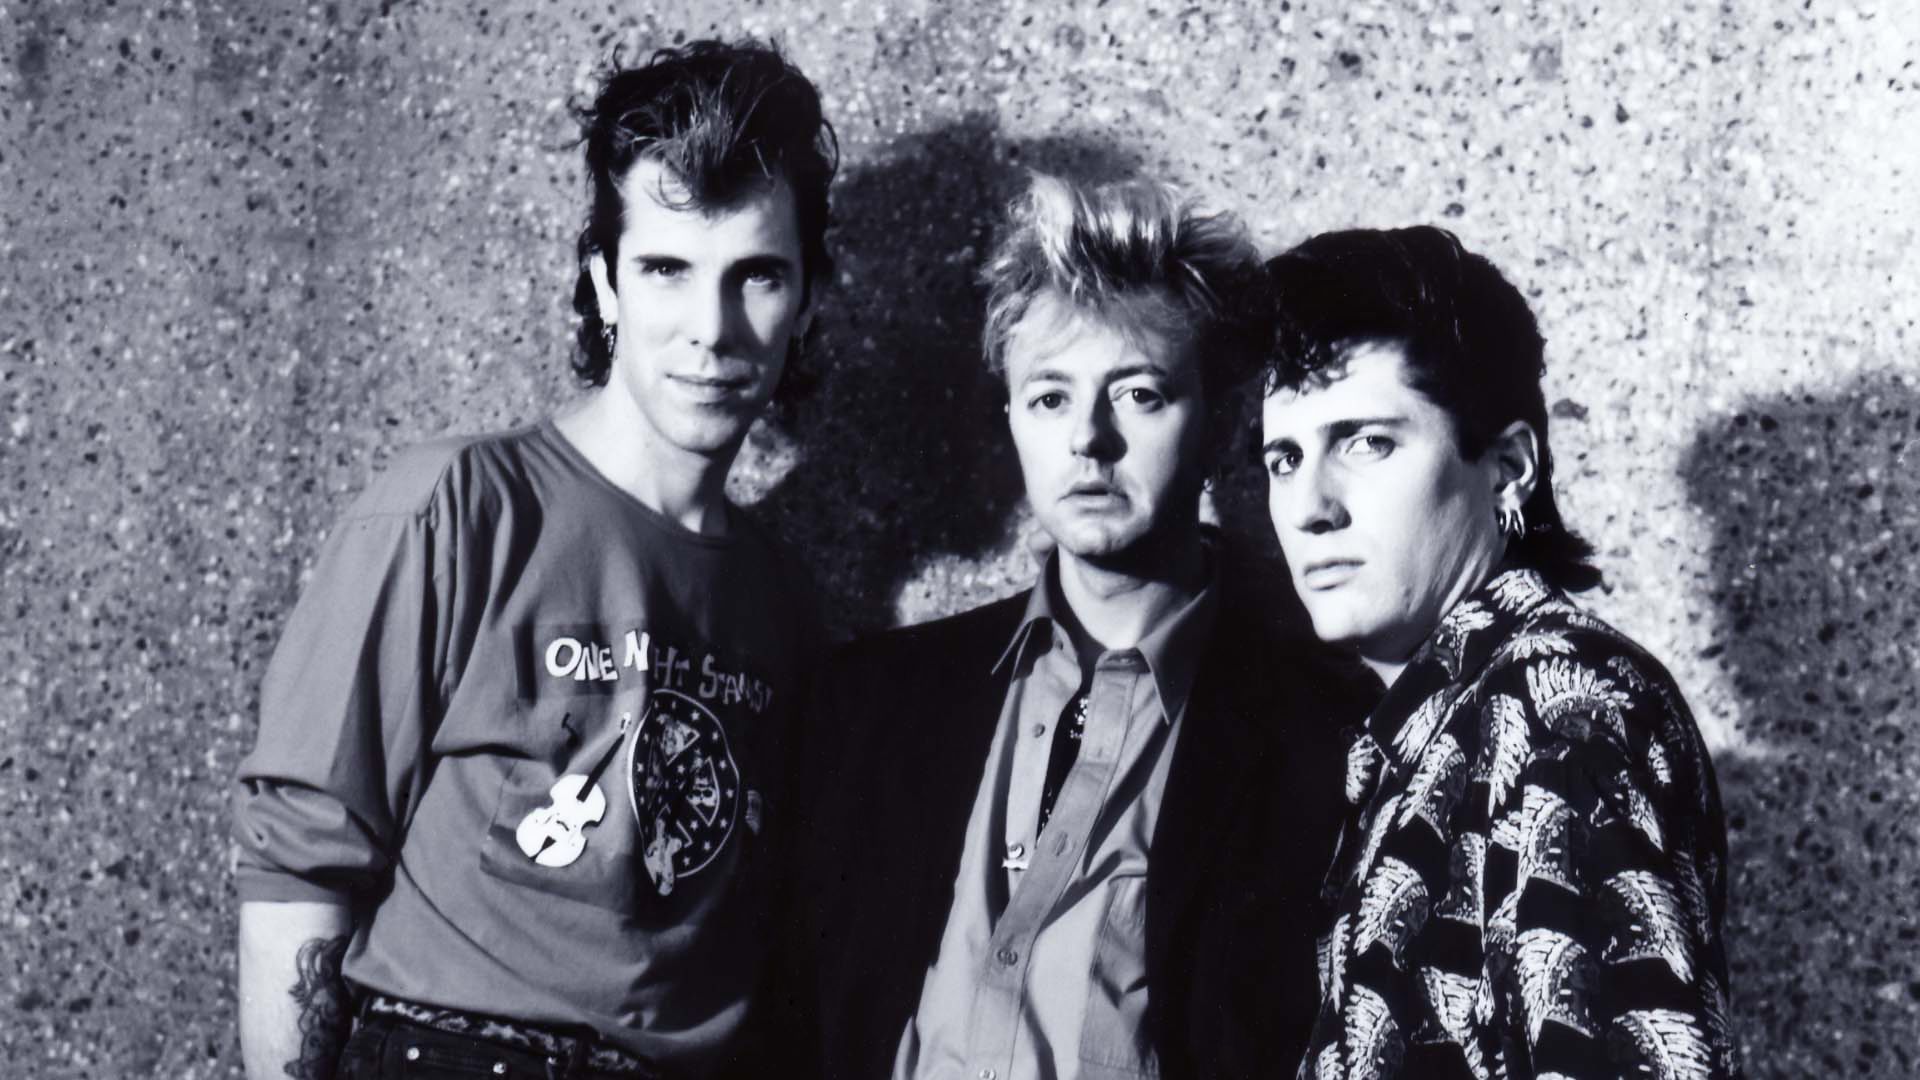 Download Stray Cats wallpaper to your cell phone cats rock